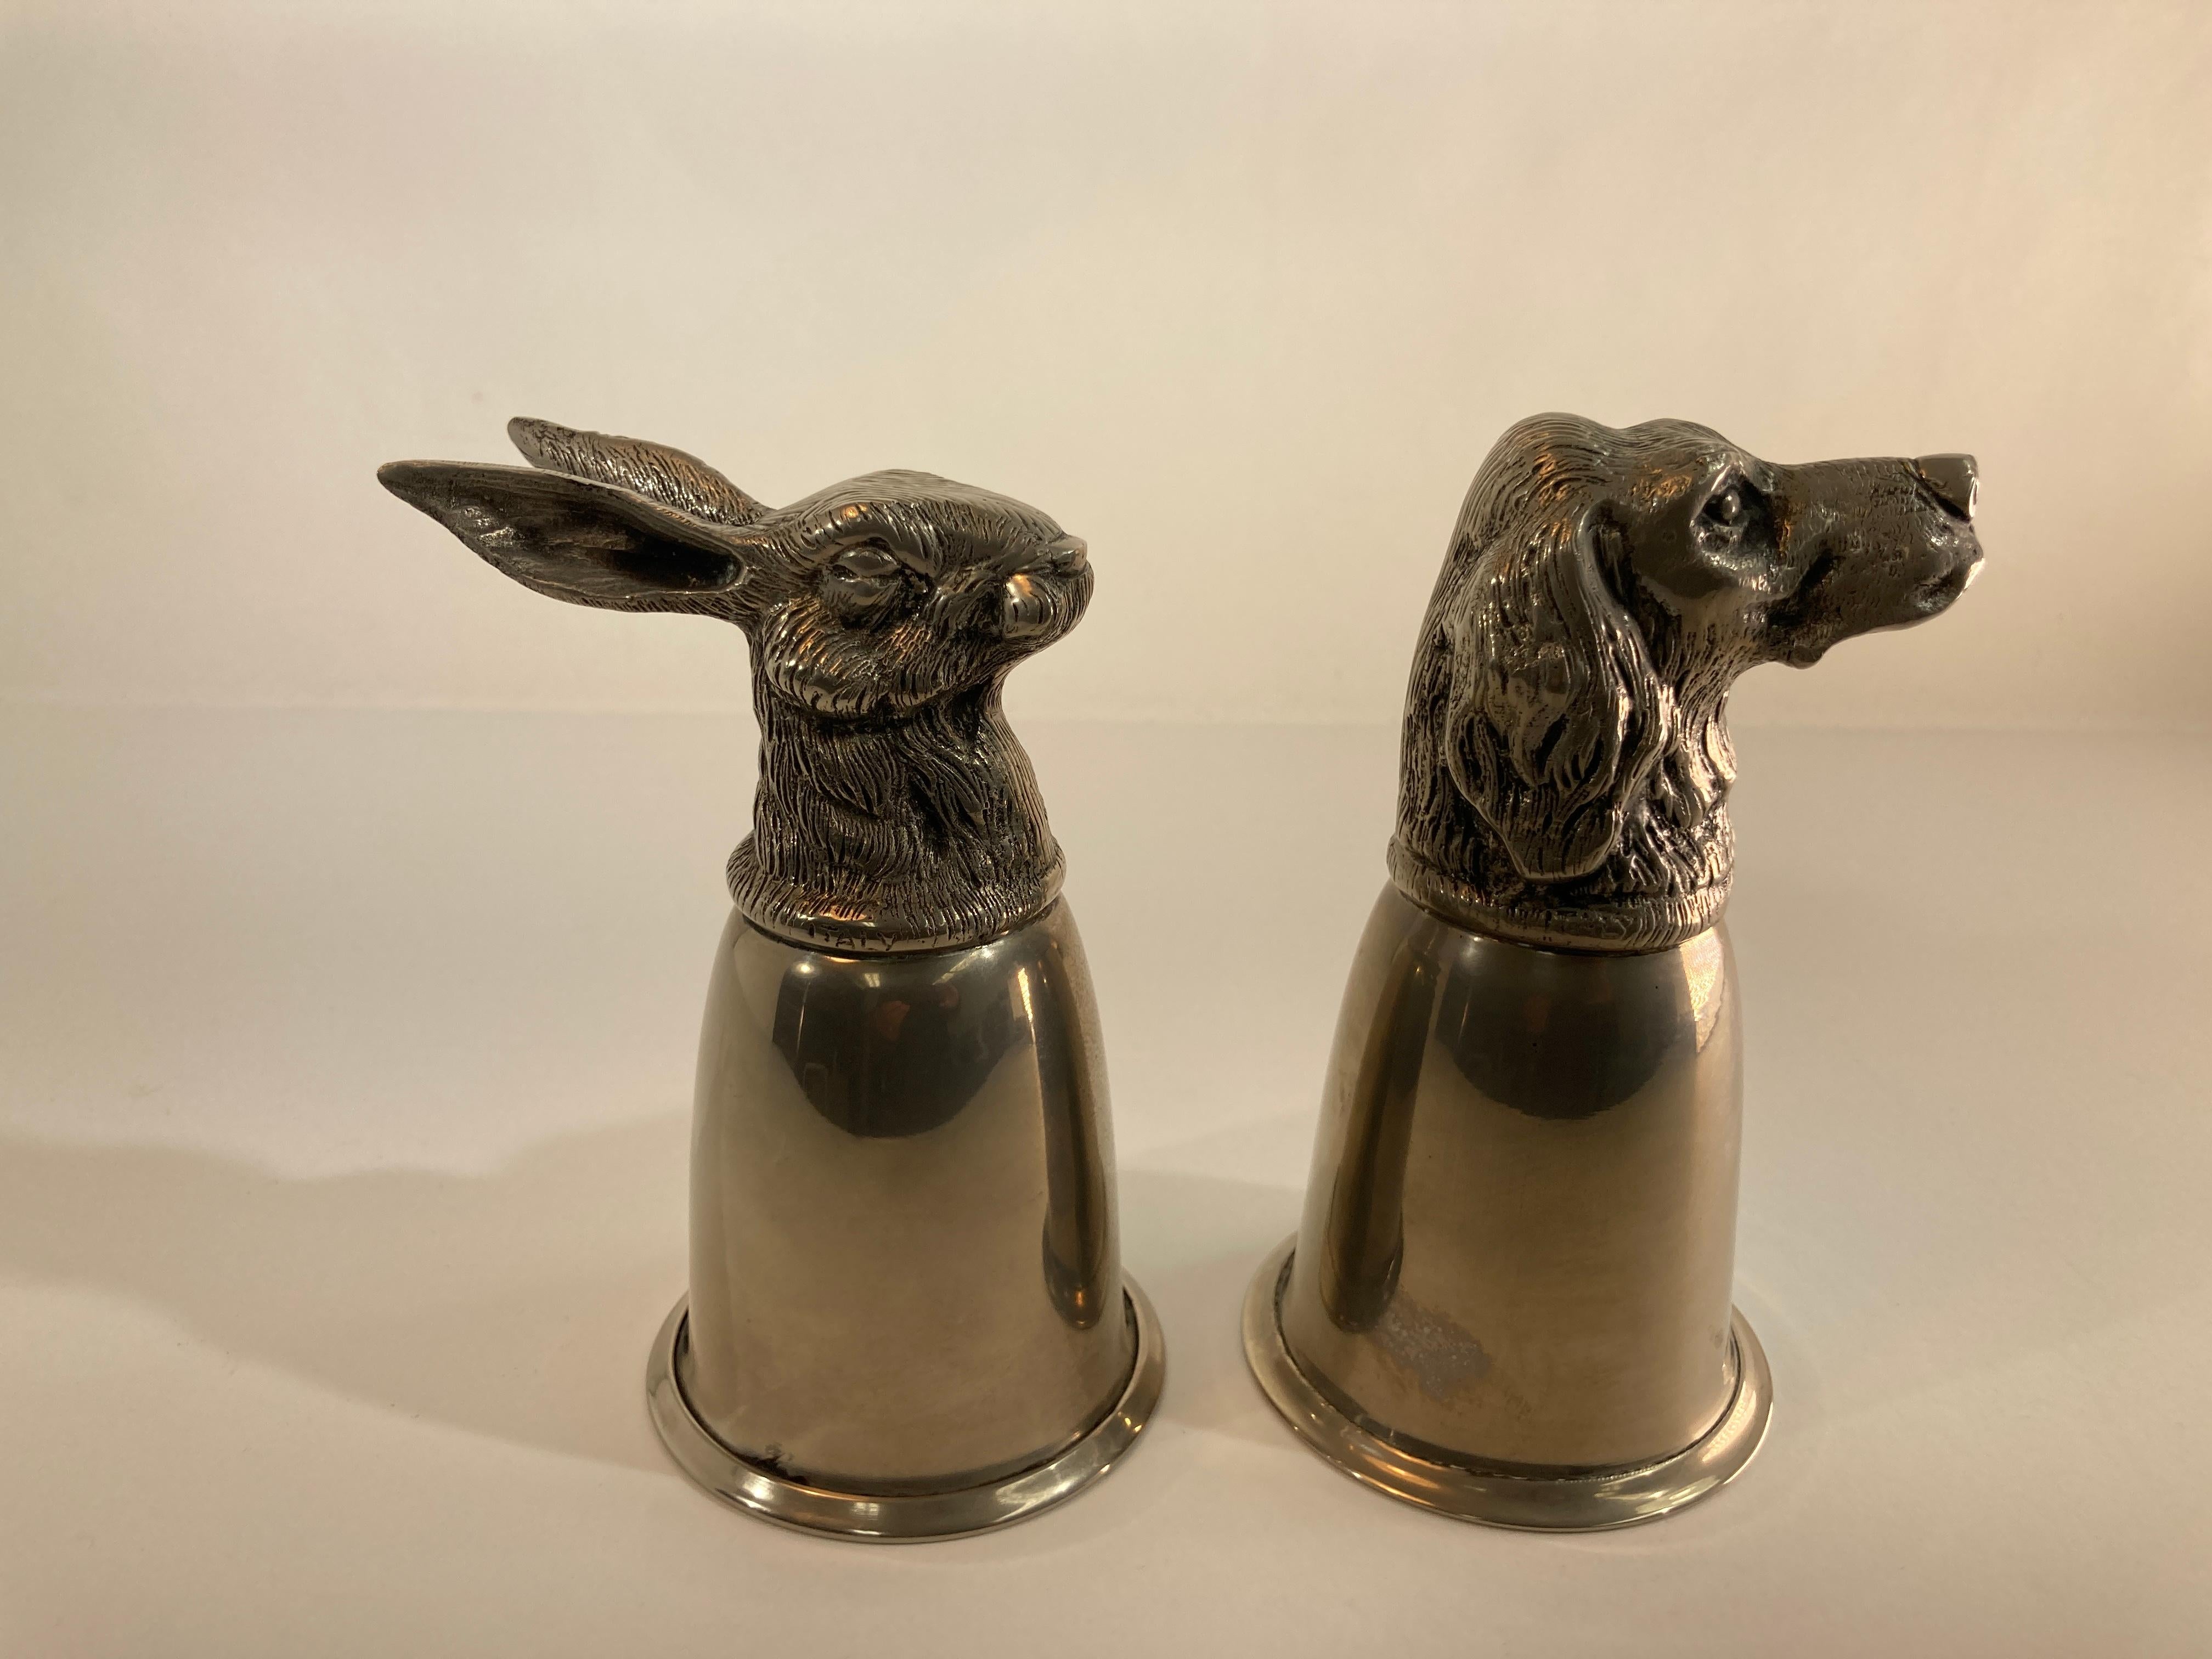 GUCCI Silver Plated Animal Stirrup Cups Signed Italy, 1970s For Sale 12